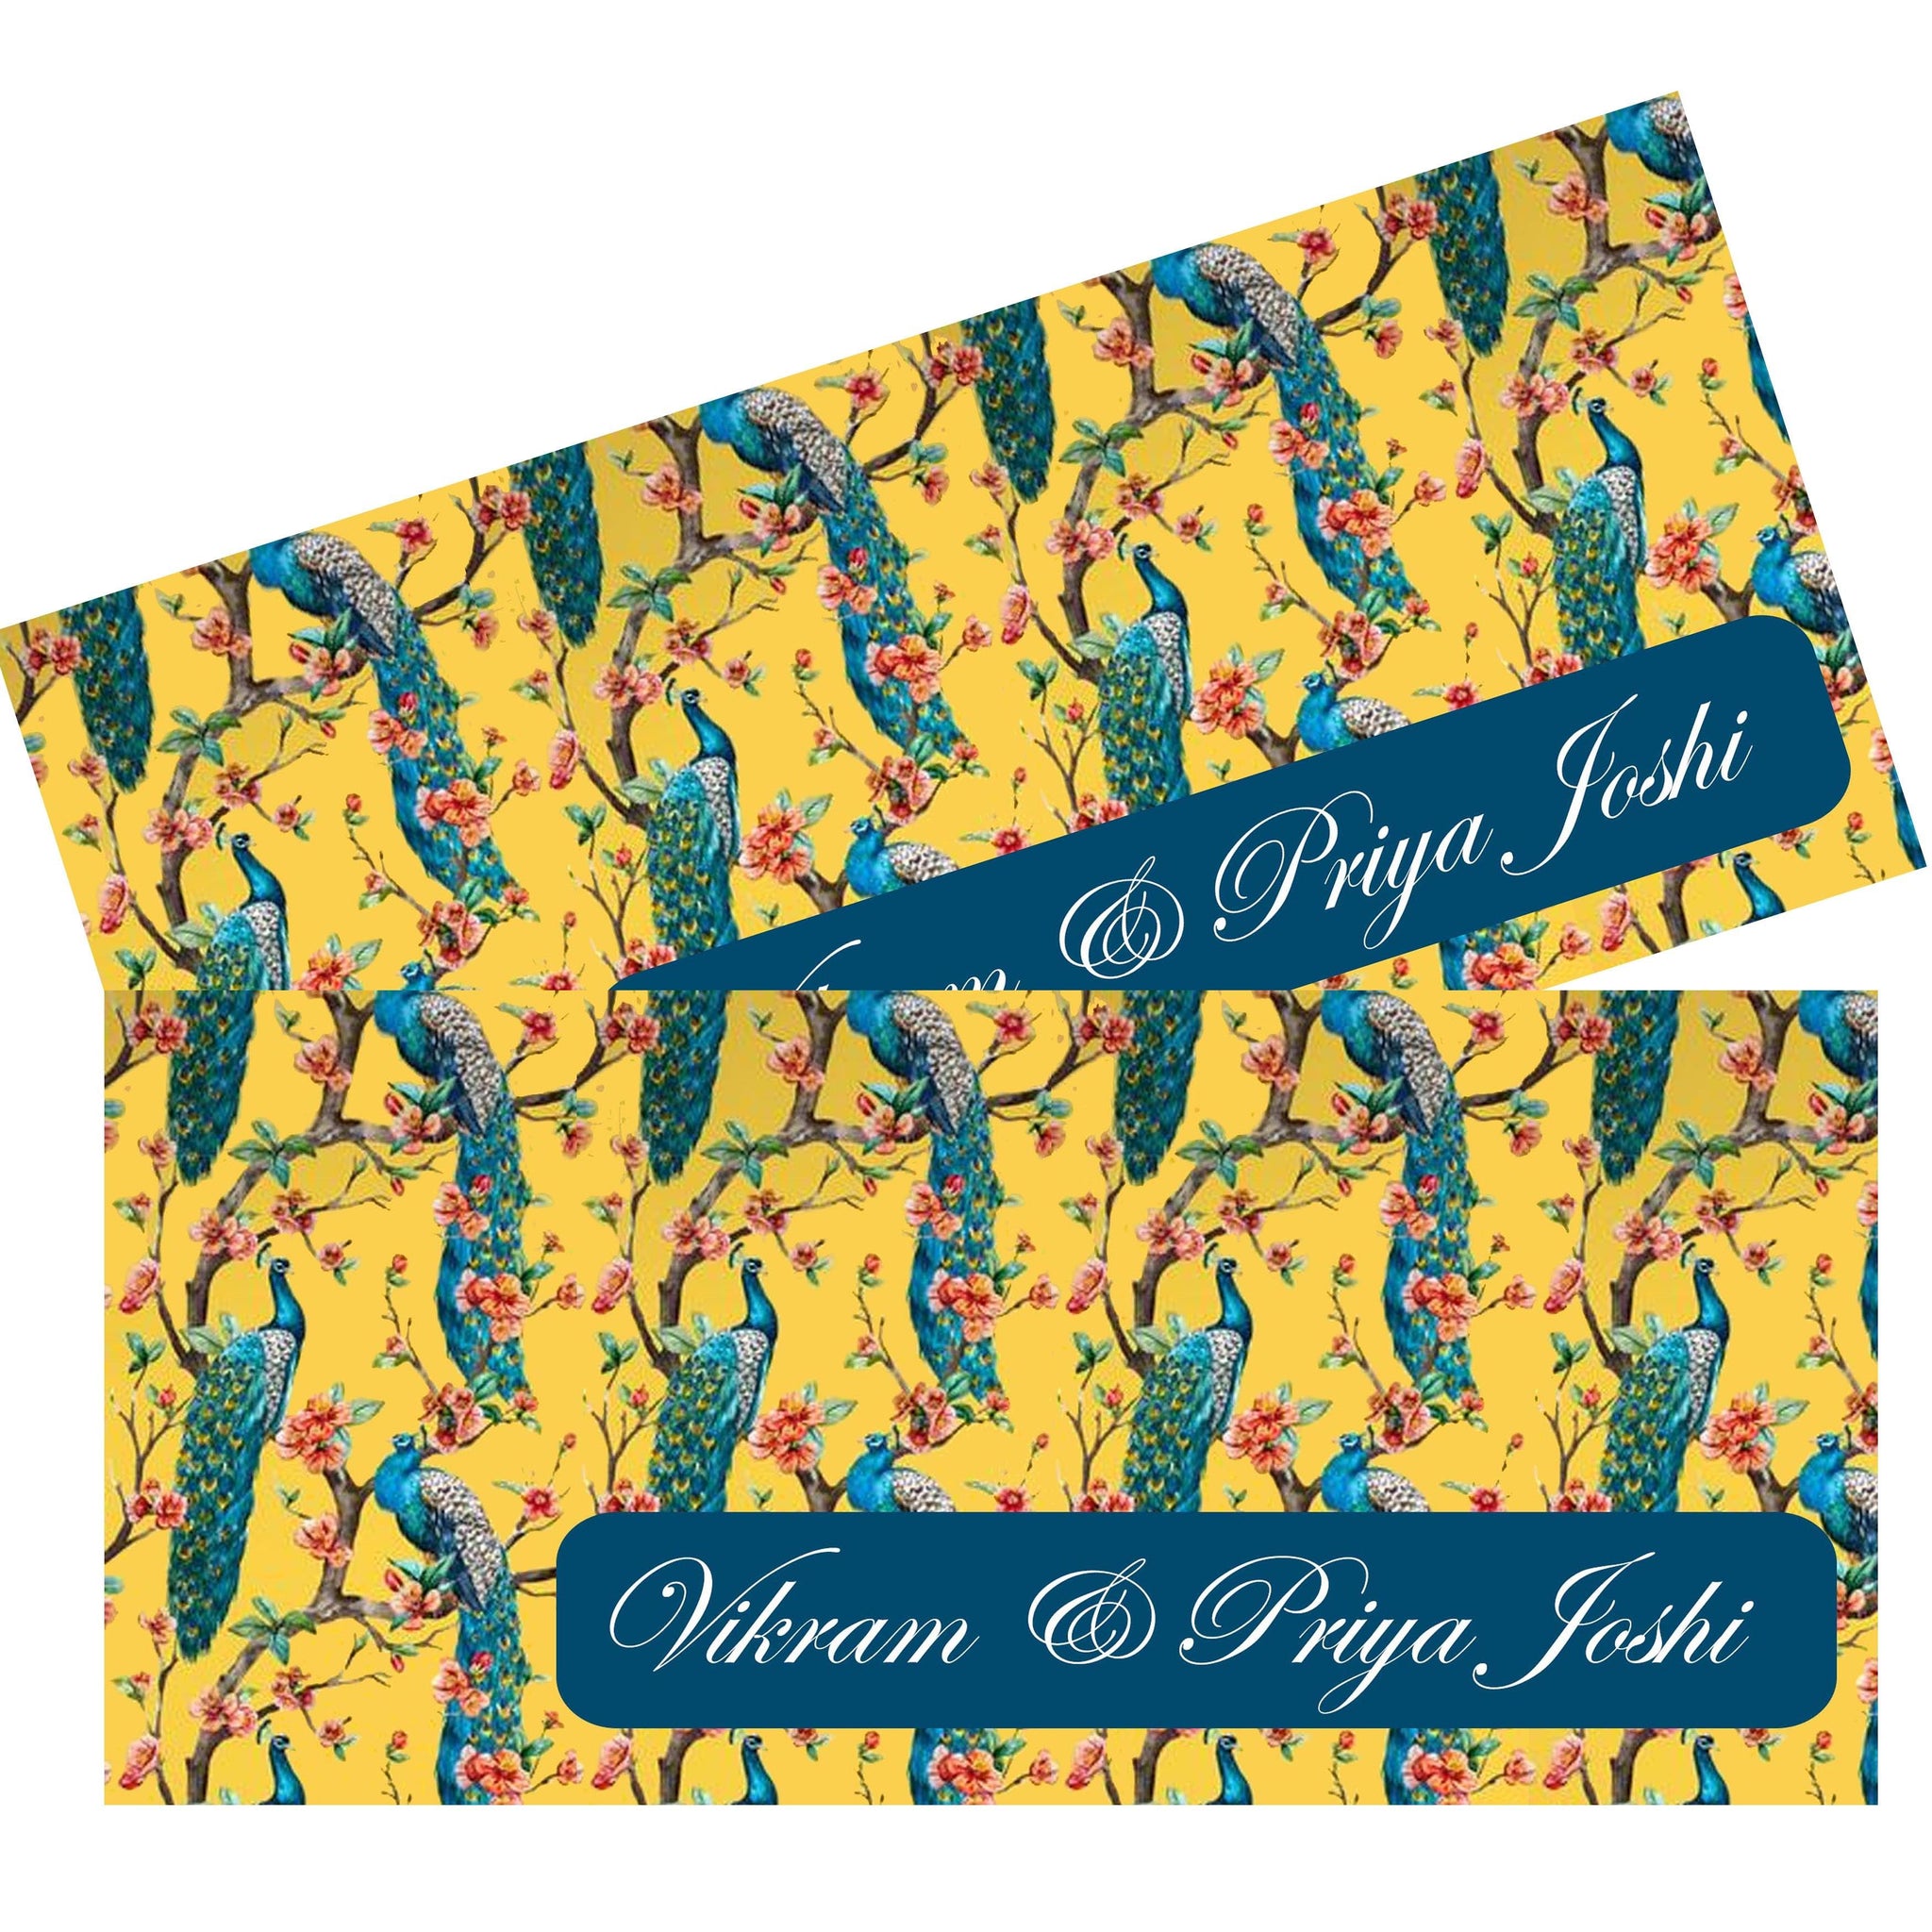 Personalised Money Envelopes - Peacock Theme - Set of 20 Chatterbox Labels